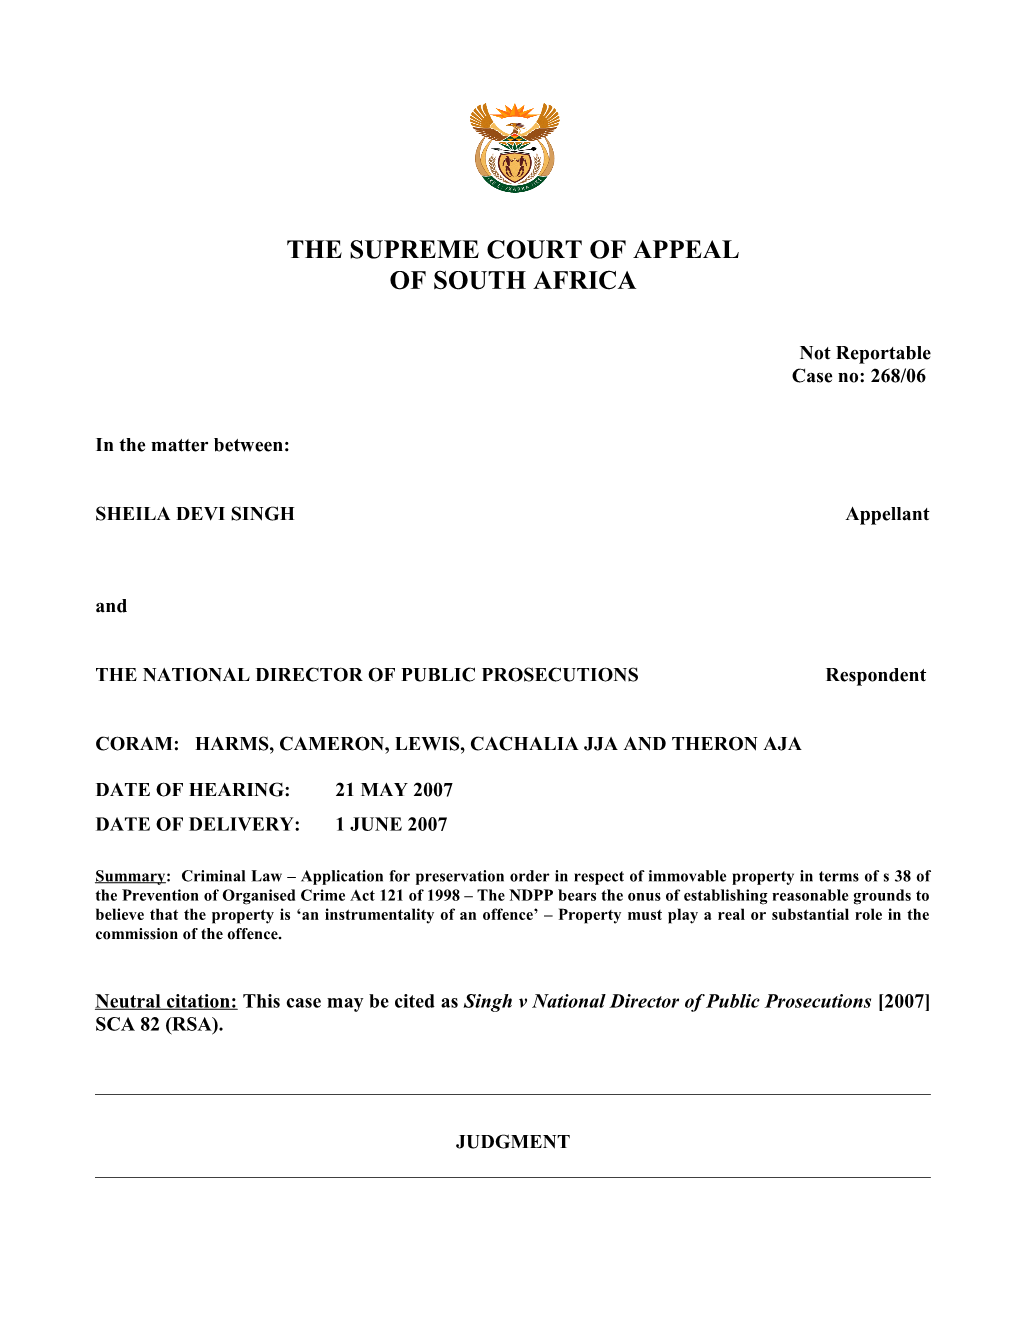 This Appeal Concerns a Preservation Order Granted in Terms of S 38(2) of the Prevention